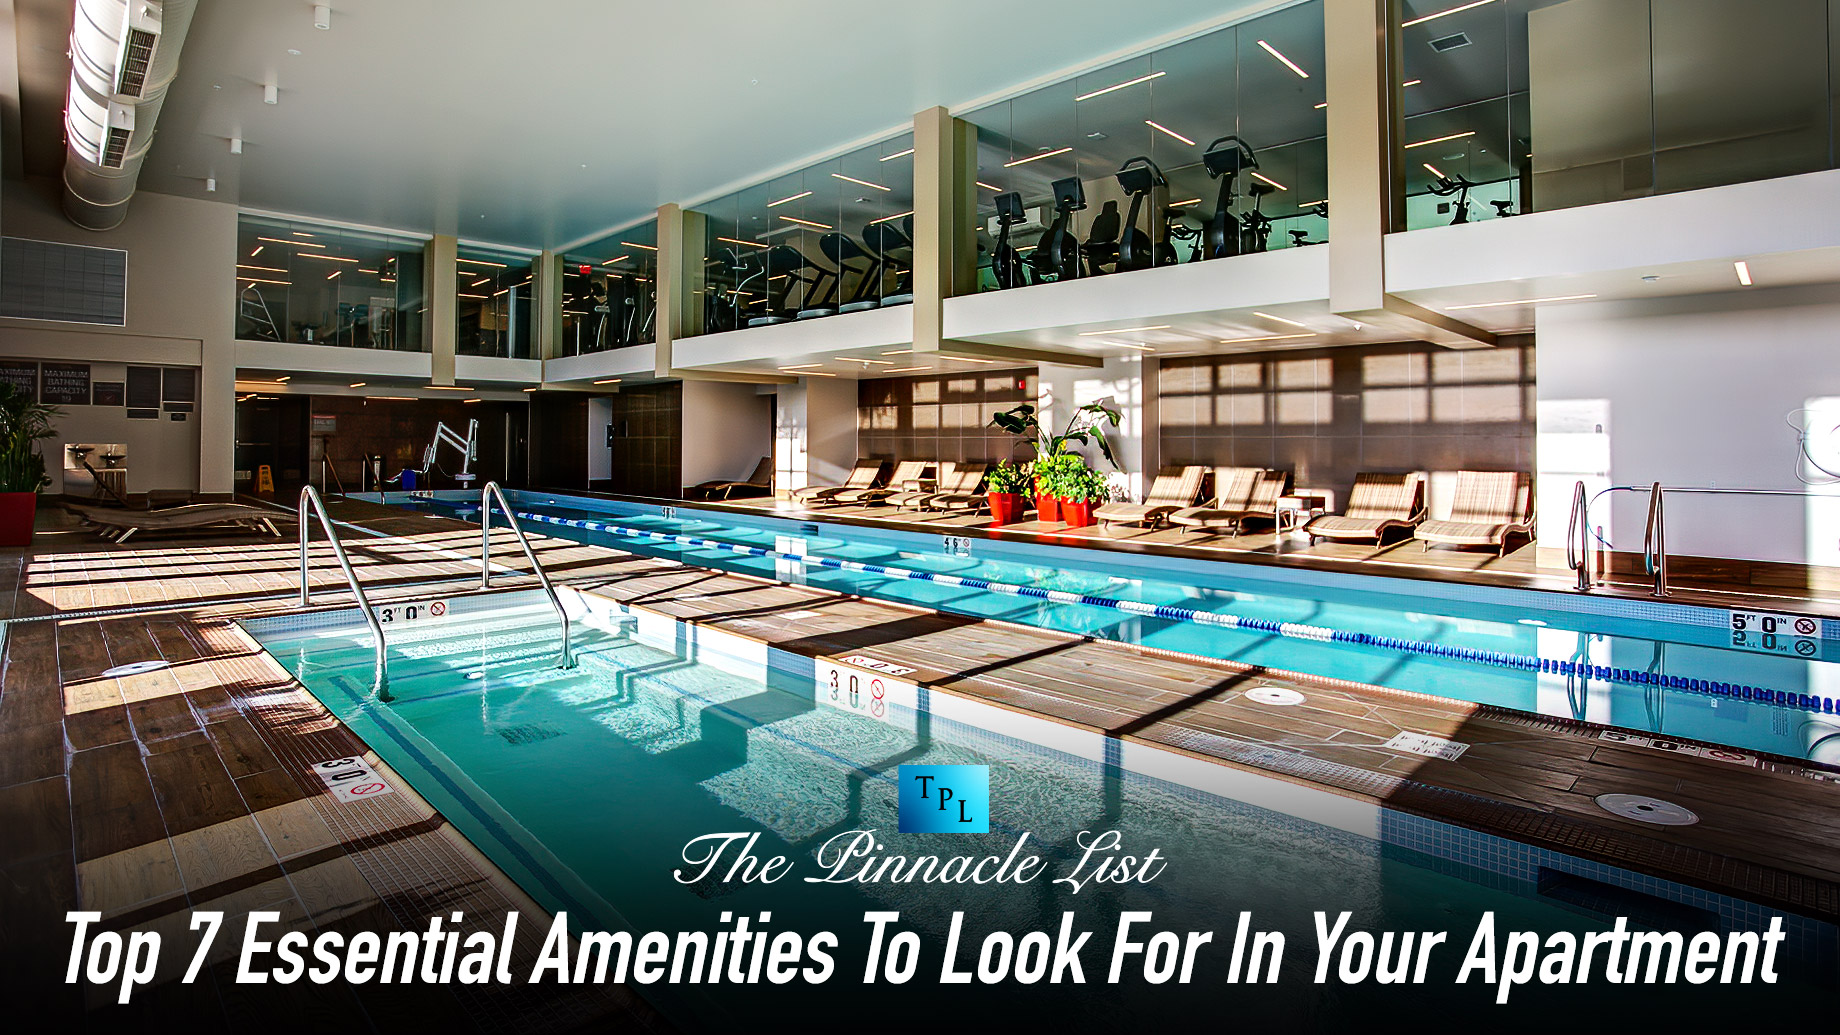 Top 7 Essential Amenities To Look For In Your Apartment